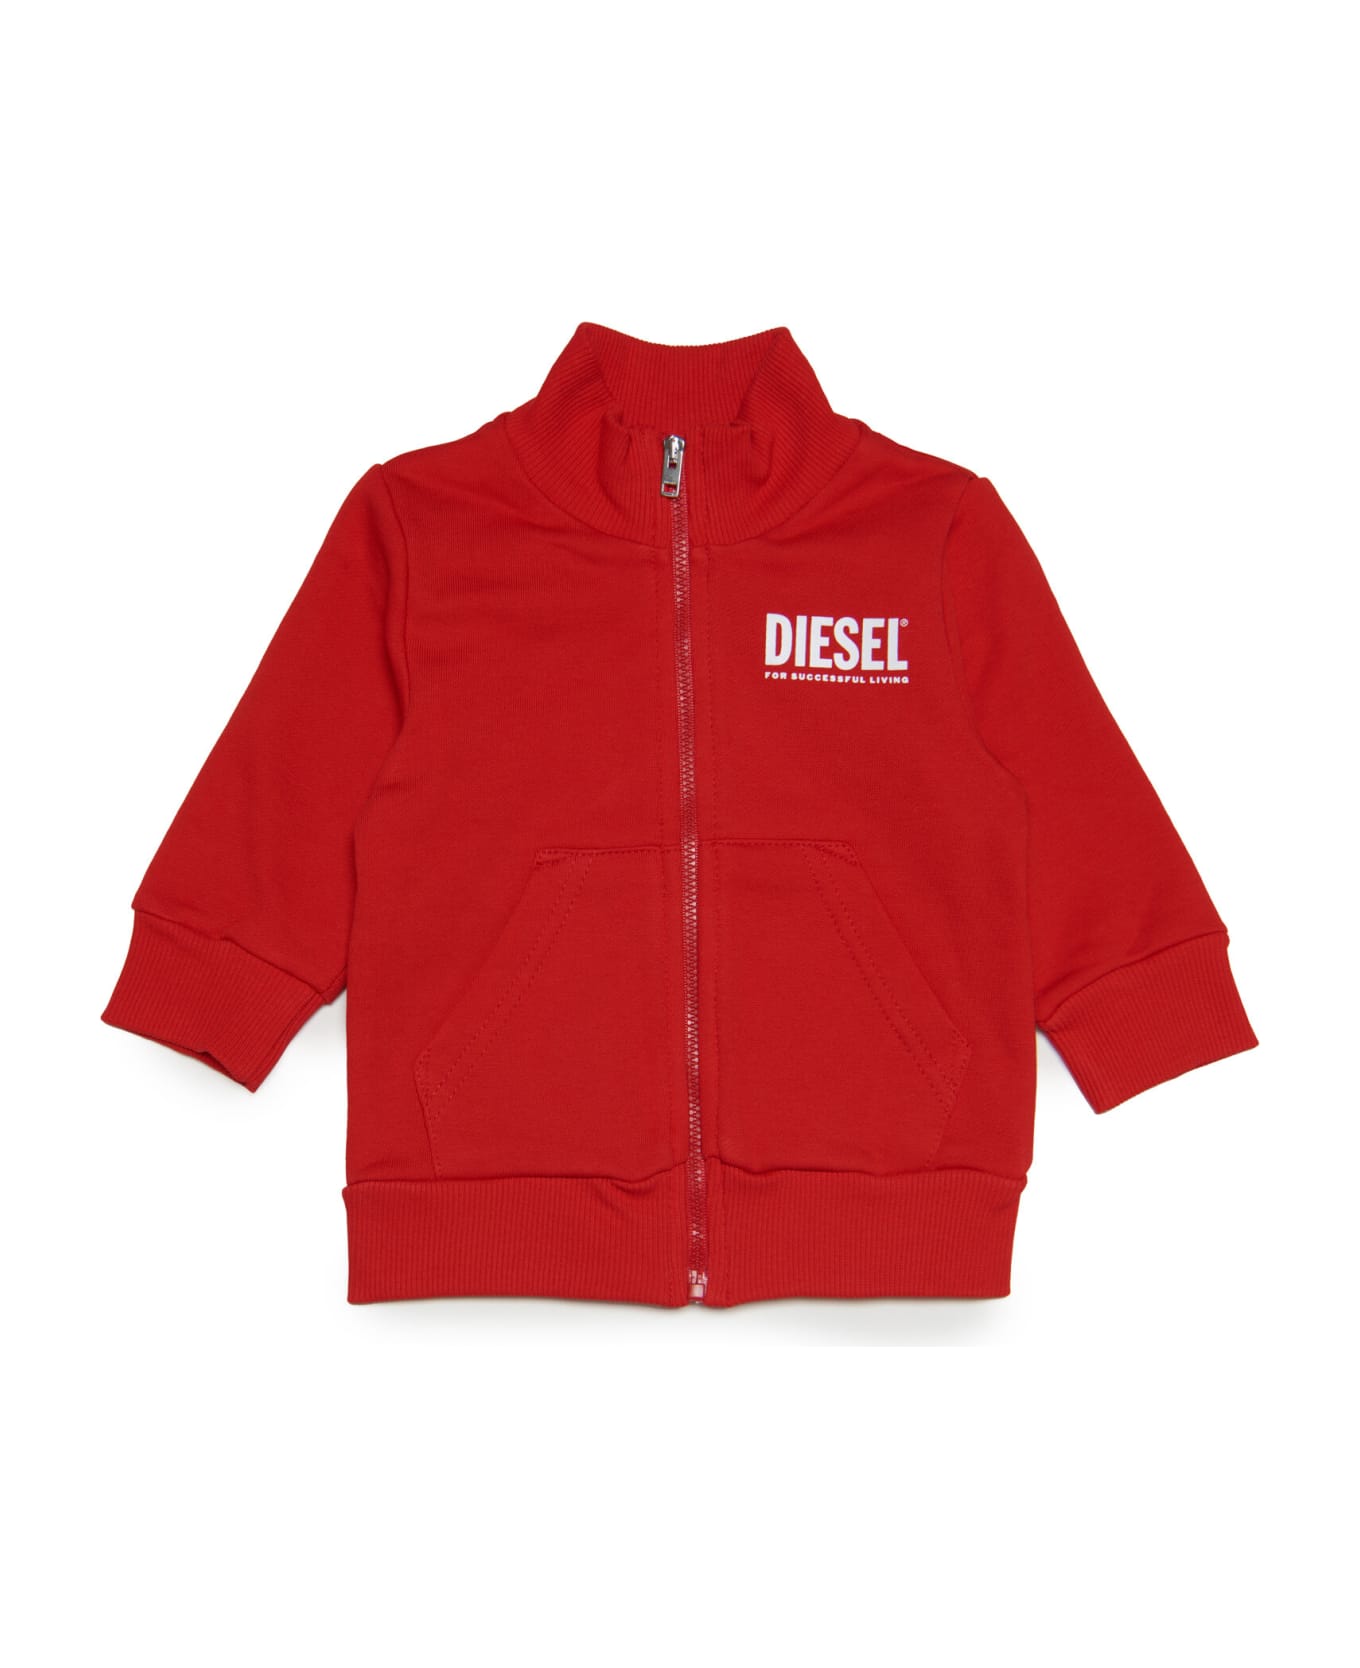 Diesel Solib Sweat-shirt Diesel Red Cotton Sweatshirt With Zip And Extra-large Logo - Carnation red